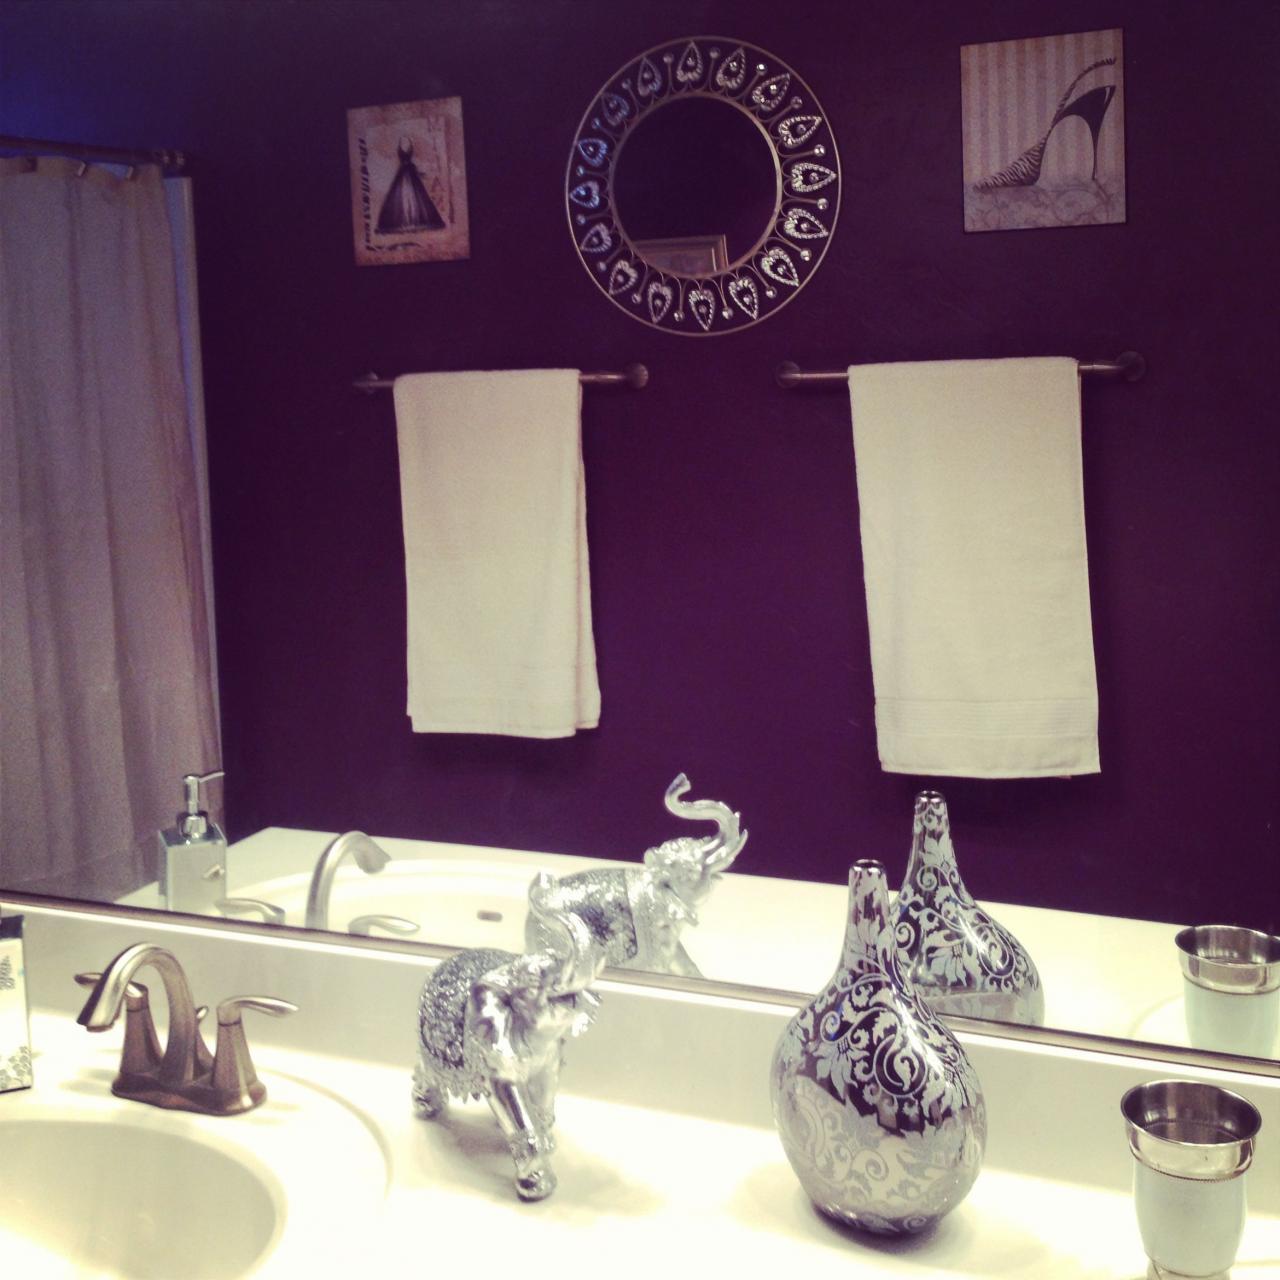 Free Purple Bathroom Ideas For Small Space Home decorating Ideas